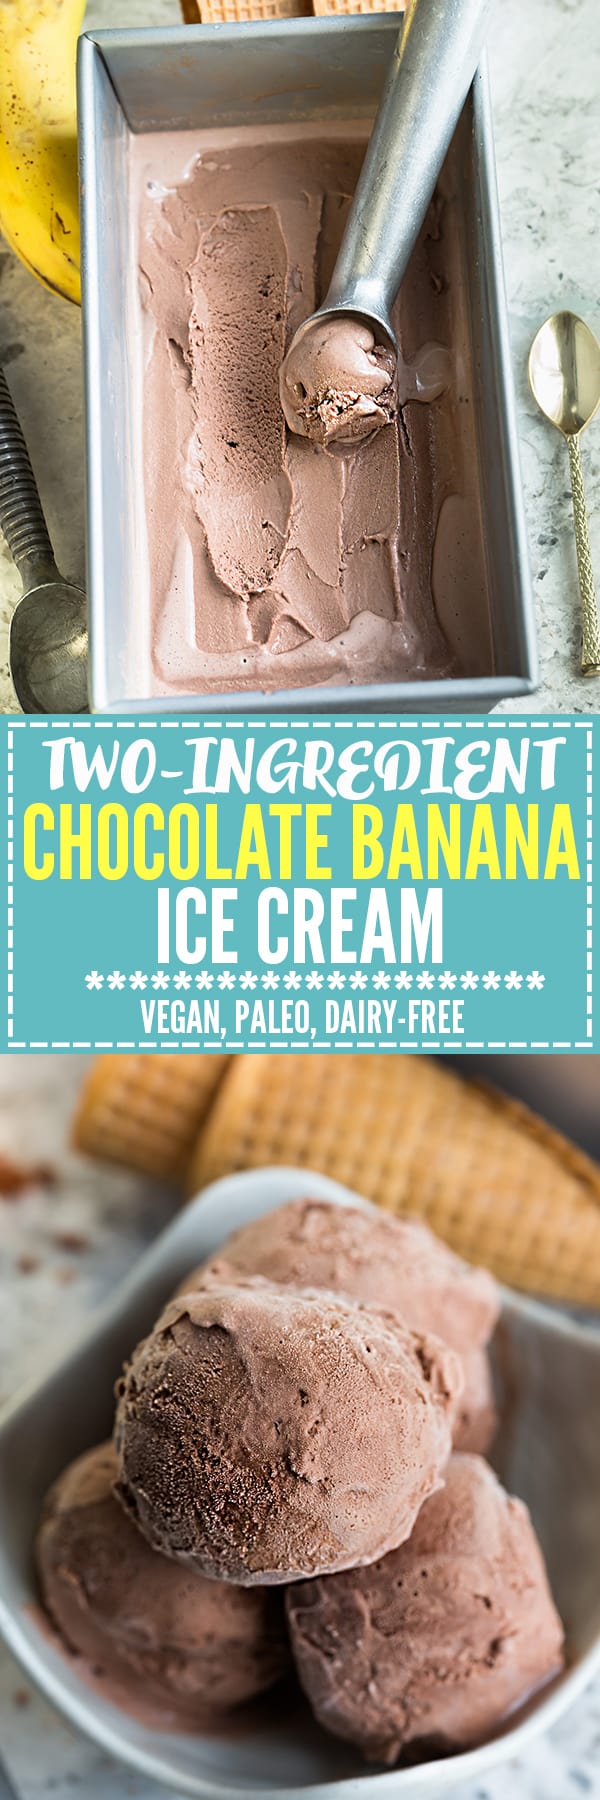 Two-Chocolate Banana Ice Cream makes the perfect healthy, paleo-friendly frozen treat! Best of all, no ice cream maker required!